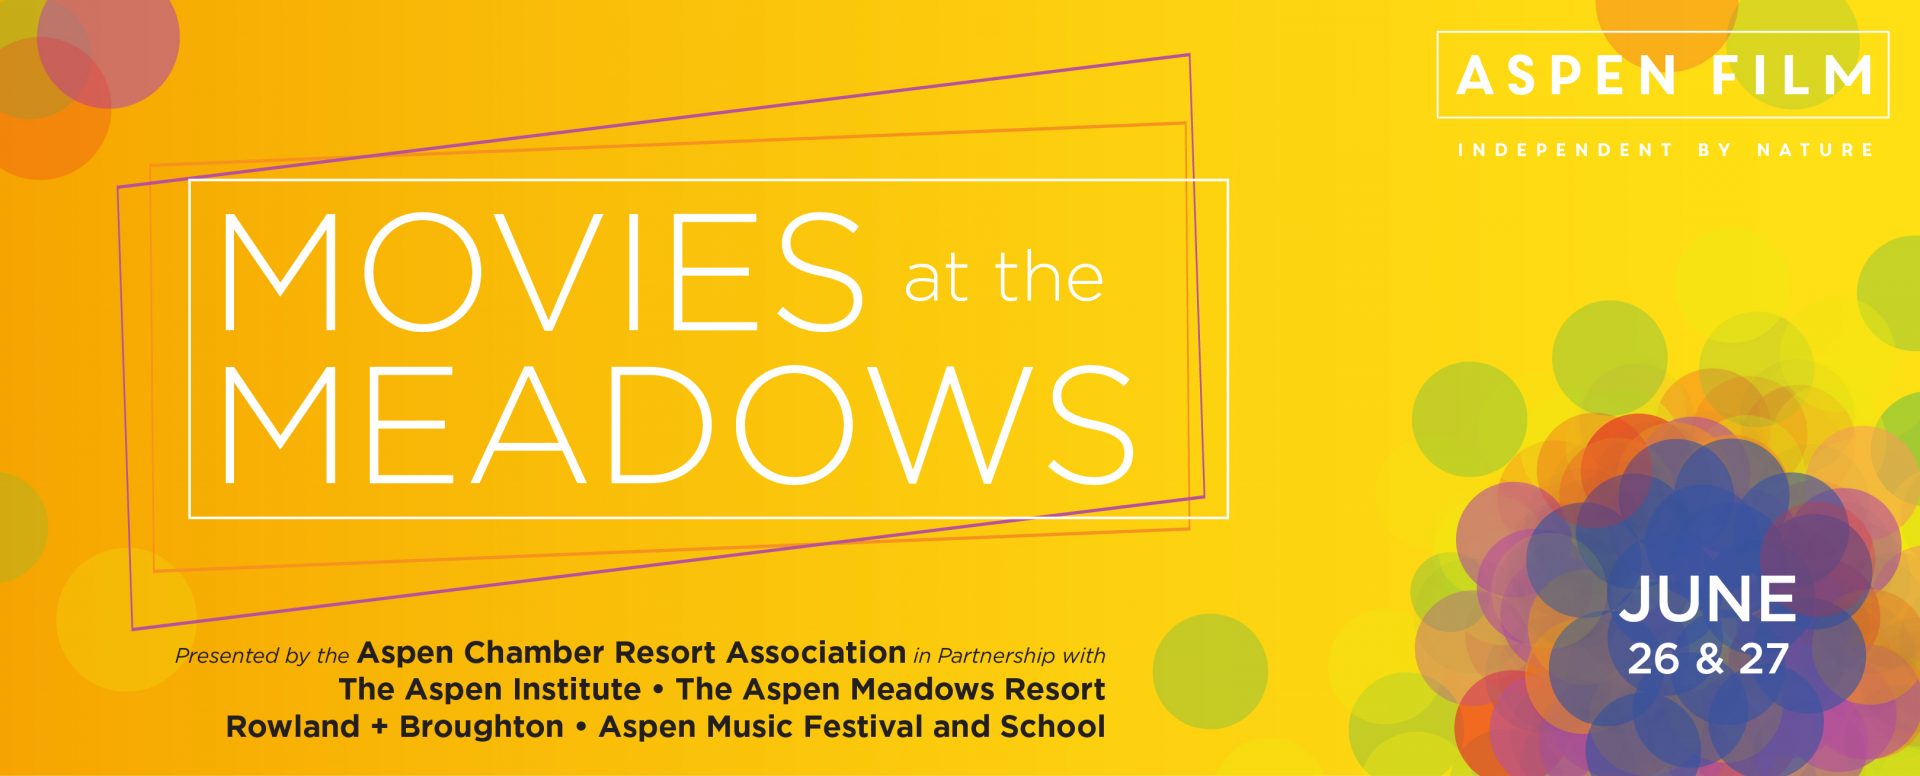 Aspen Film to Present “Movies at the Meadows,”  Two Nights of FREE Drive-in Film Experiences